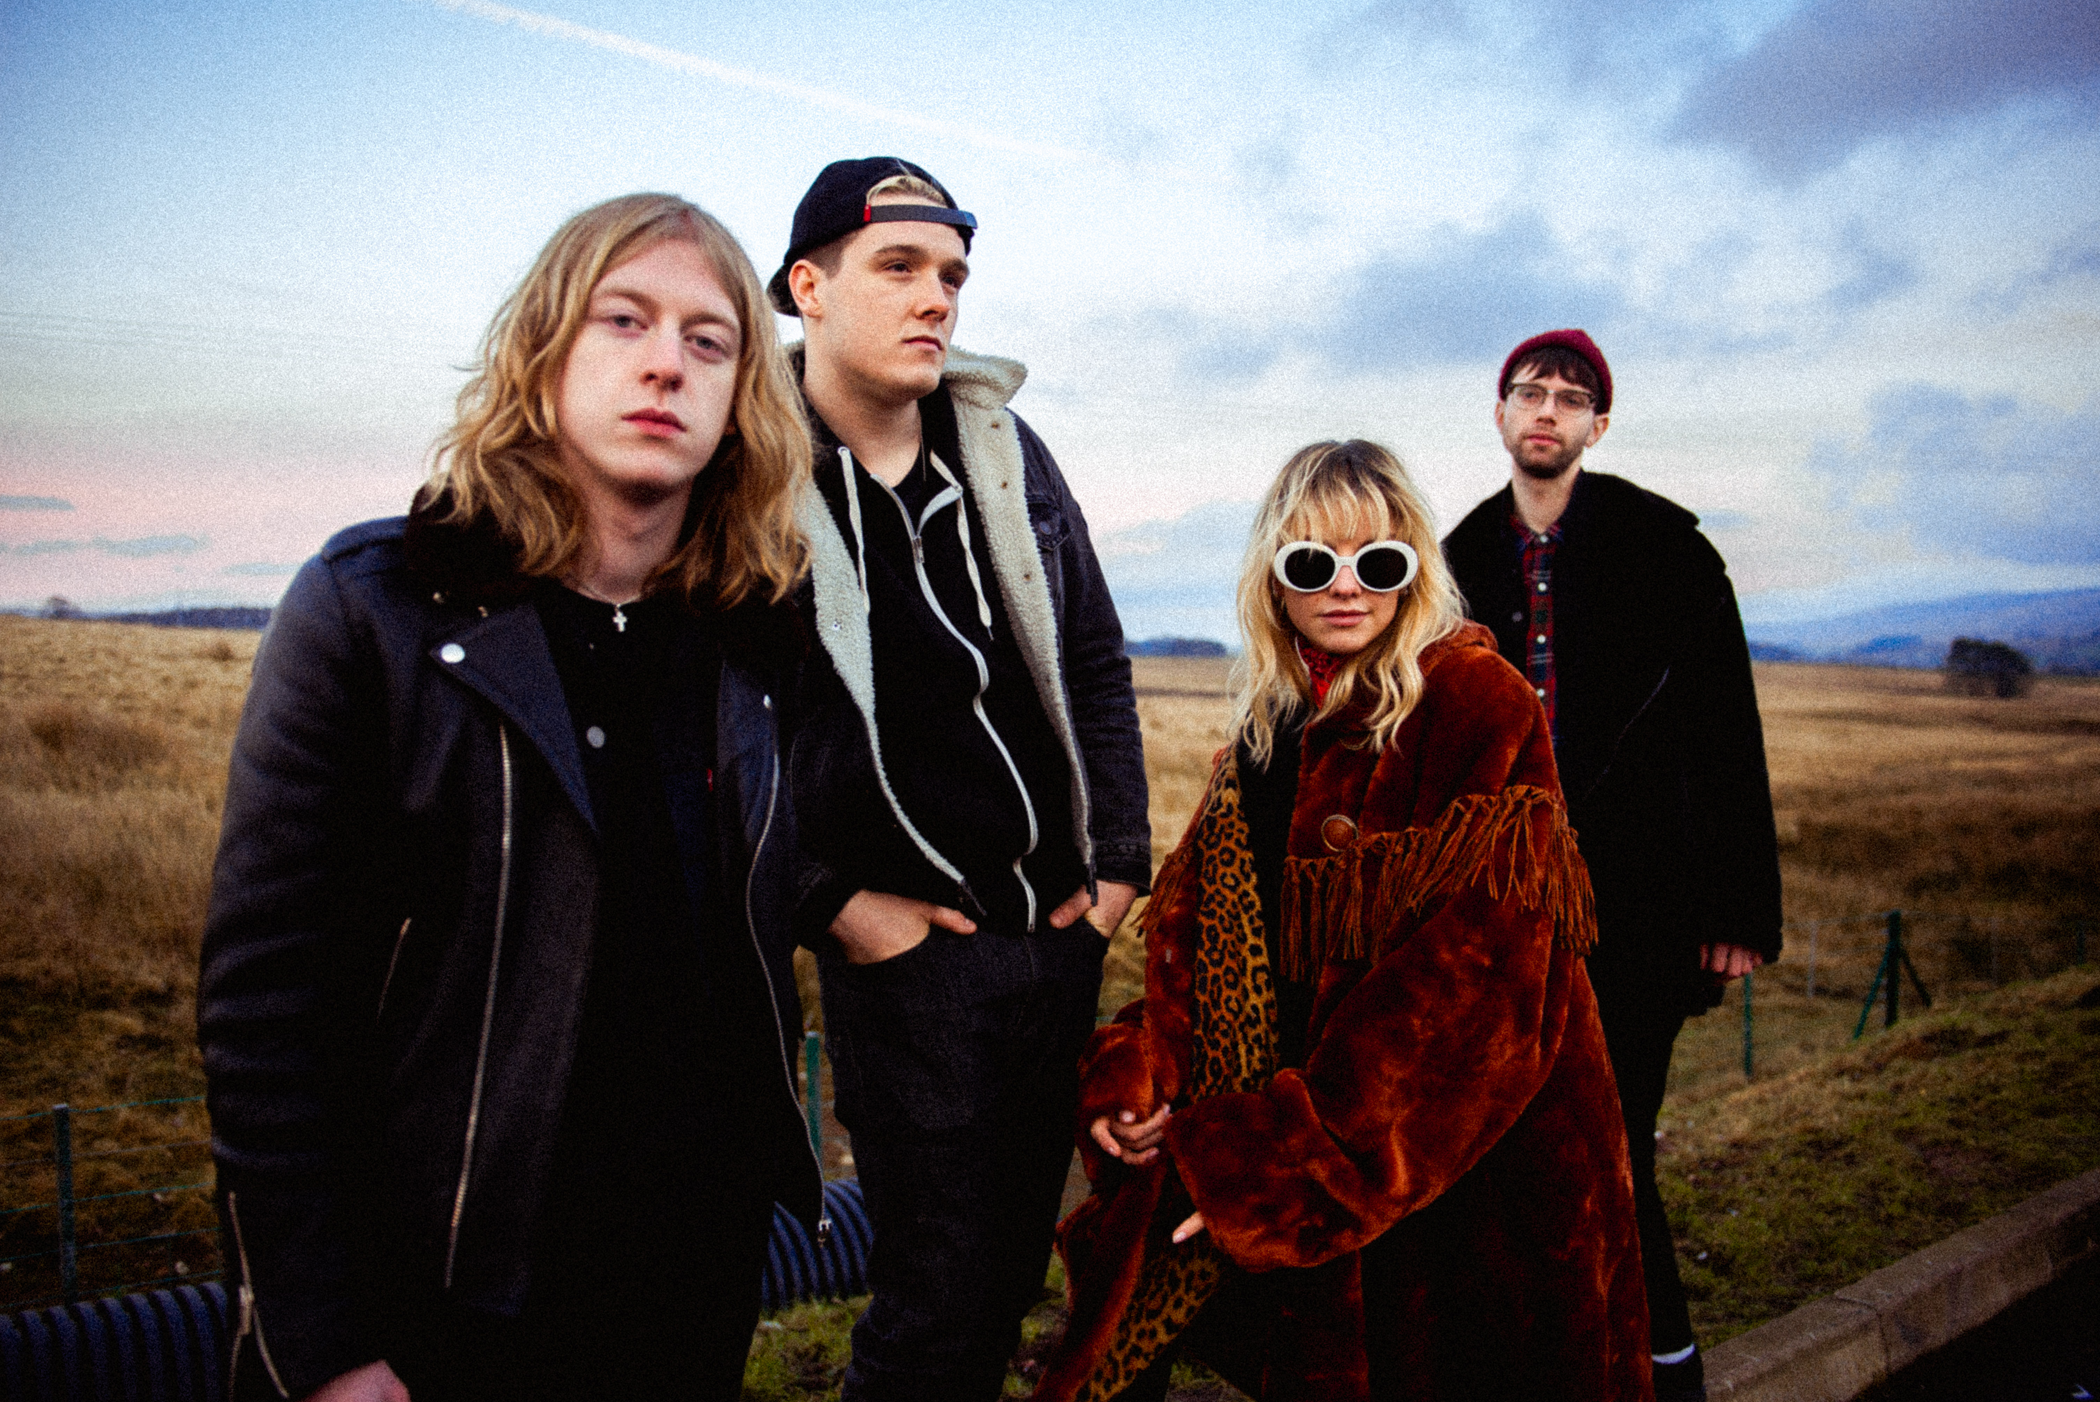 Anteros Share Candid Tour Moments in New “Cherry Drop” Music Video